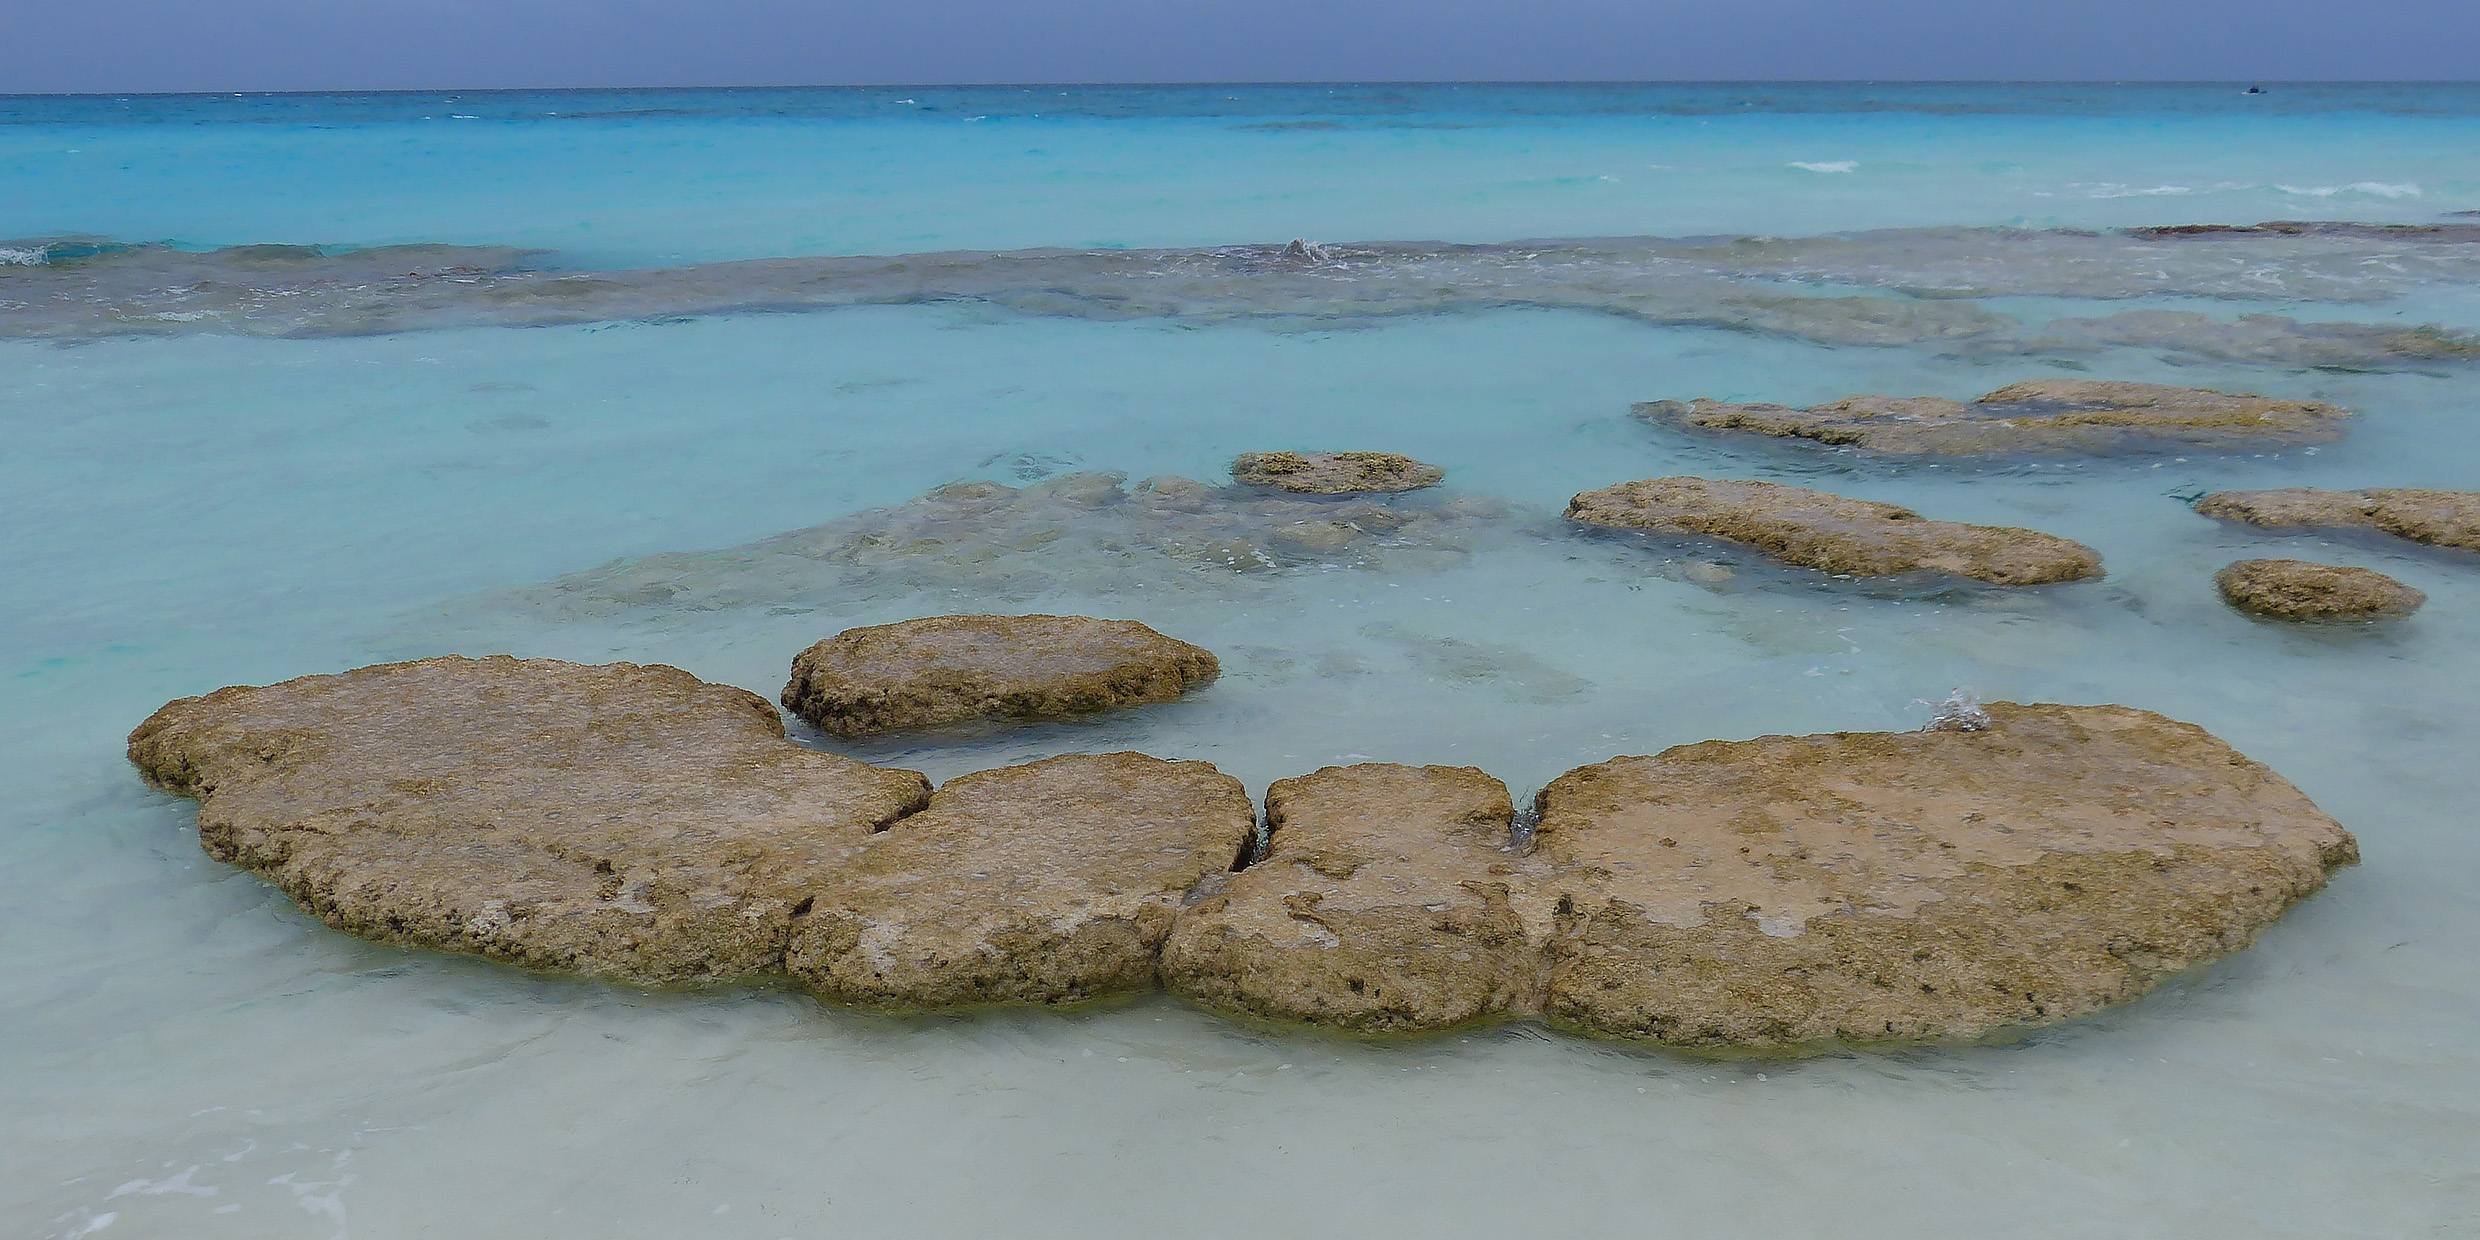 Image of a stromatolite formation in shallow water